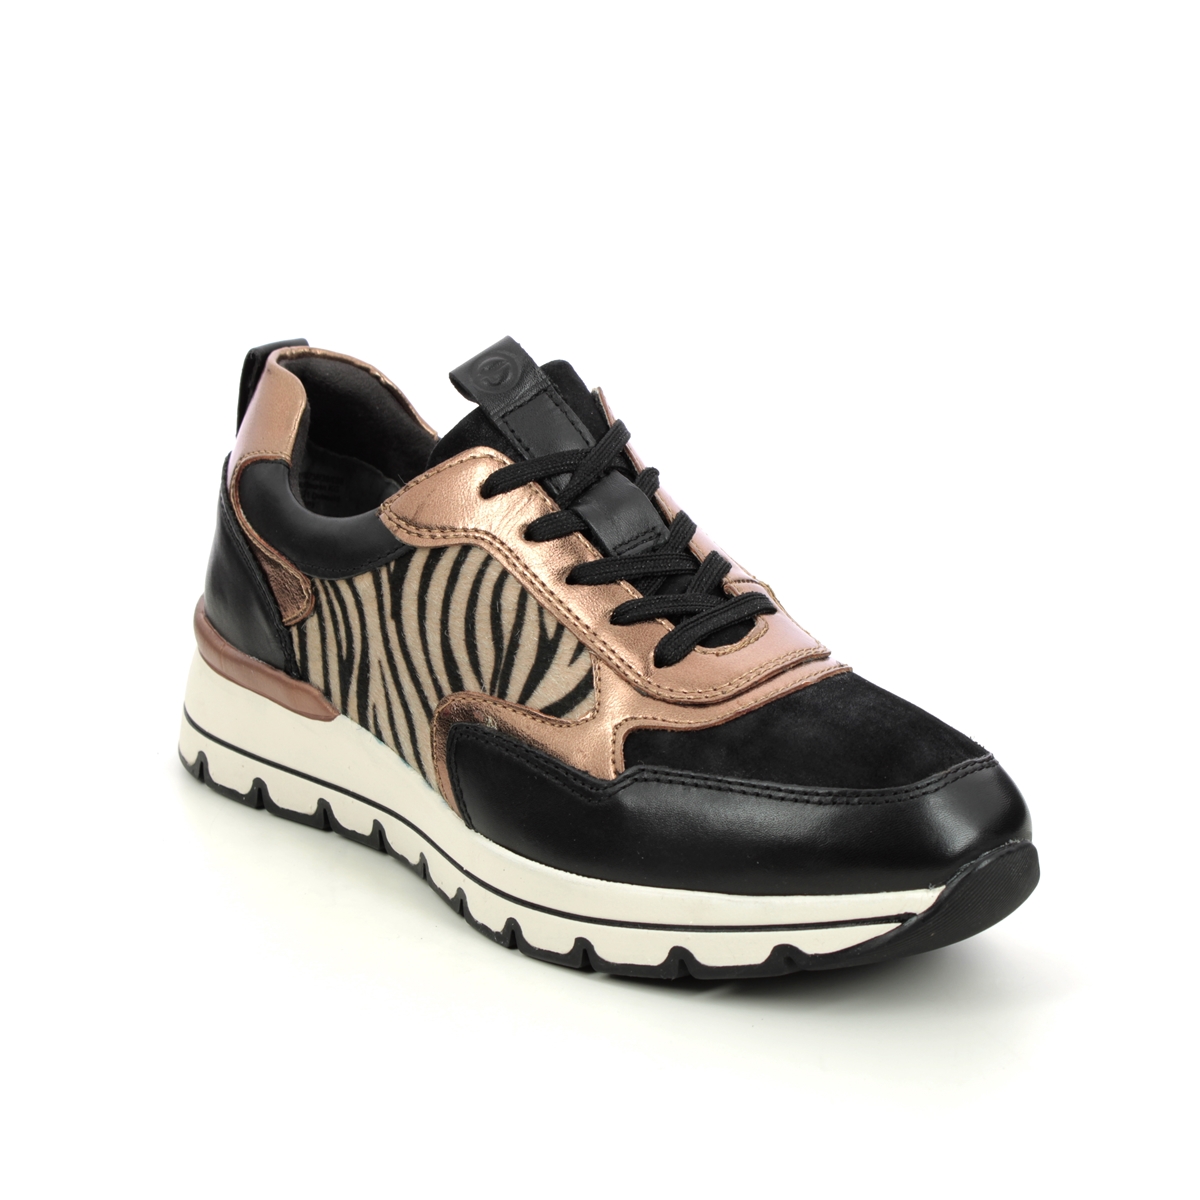 Tamaris Vinnilep Black Rose Gold Womens trainers 23736-39-089 in a Plain Leather and Man-made in Size 36